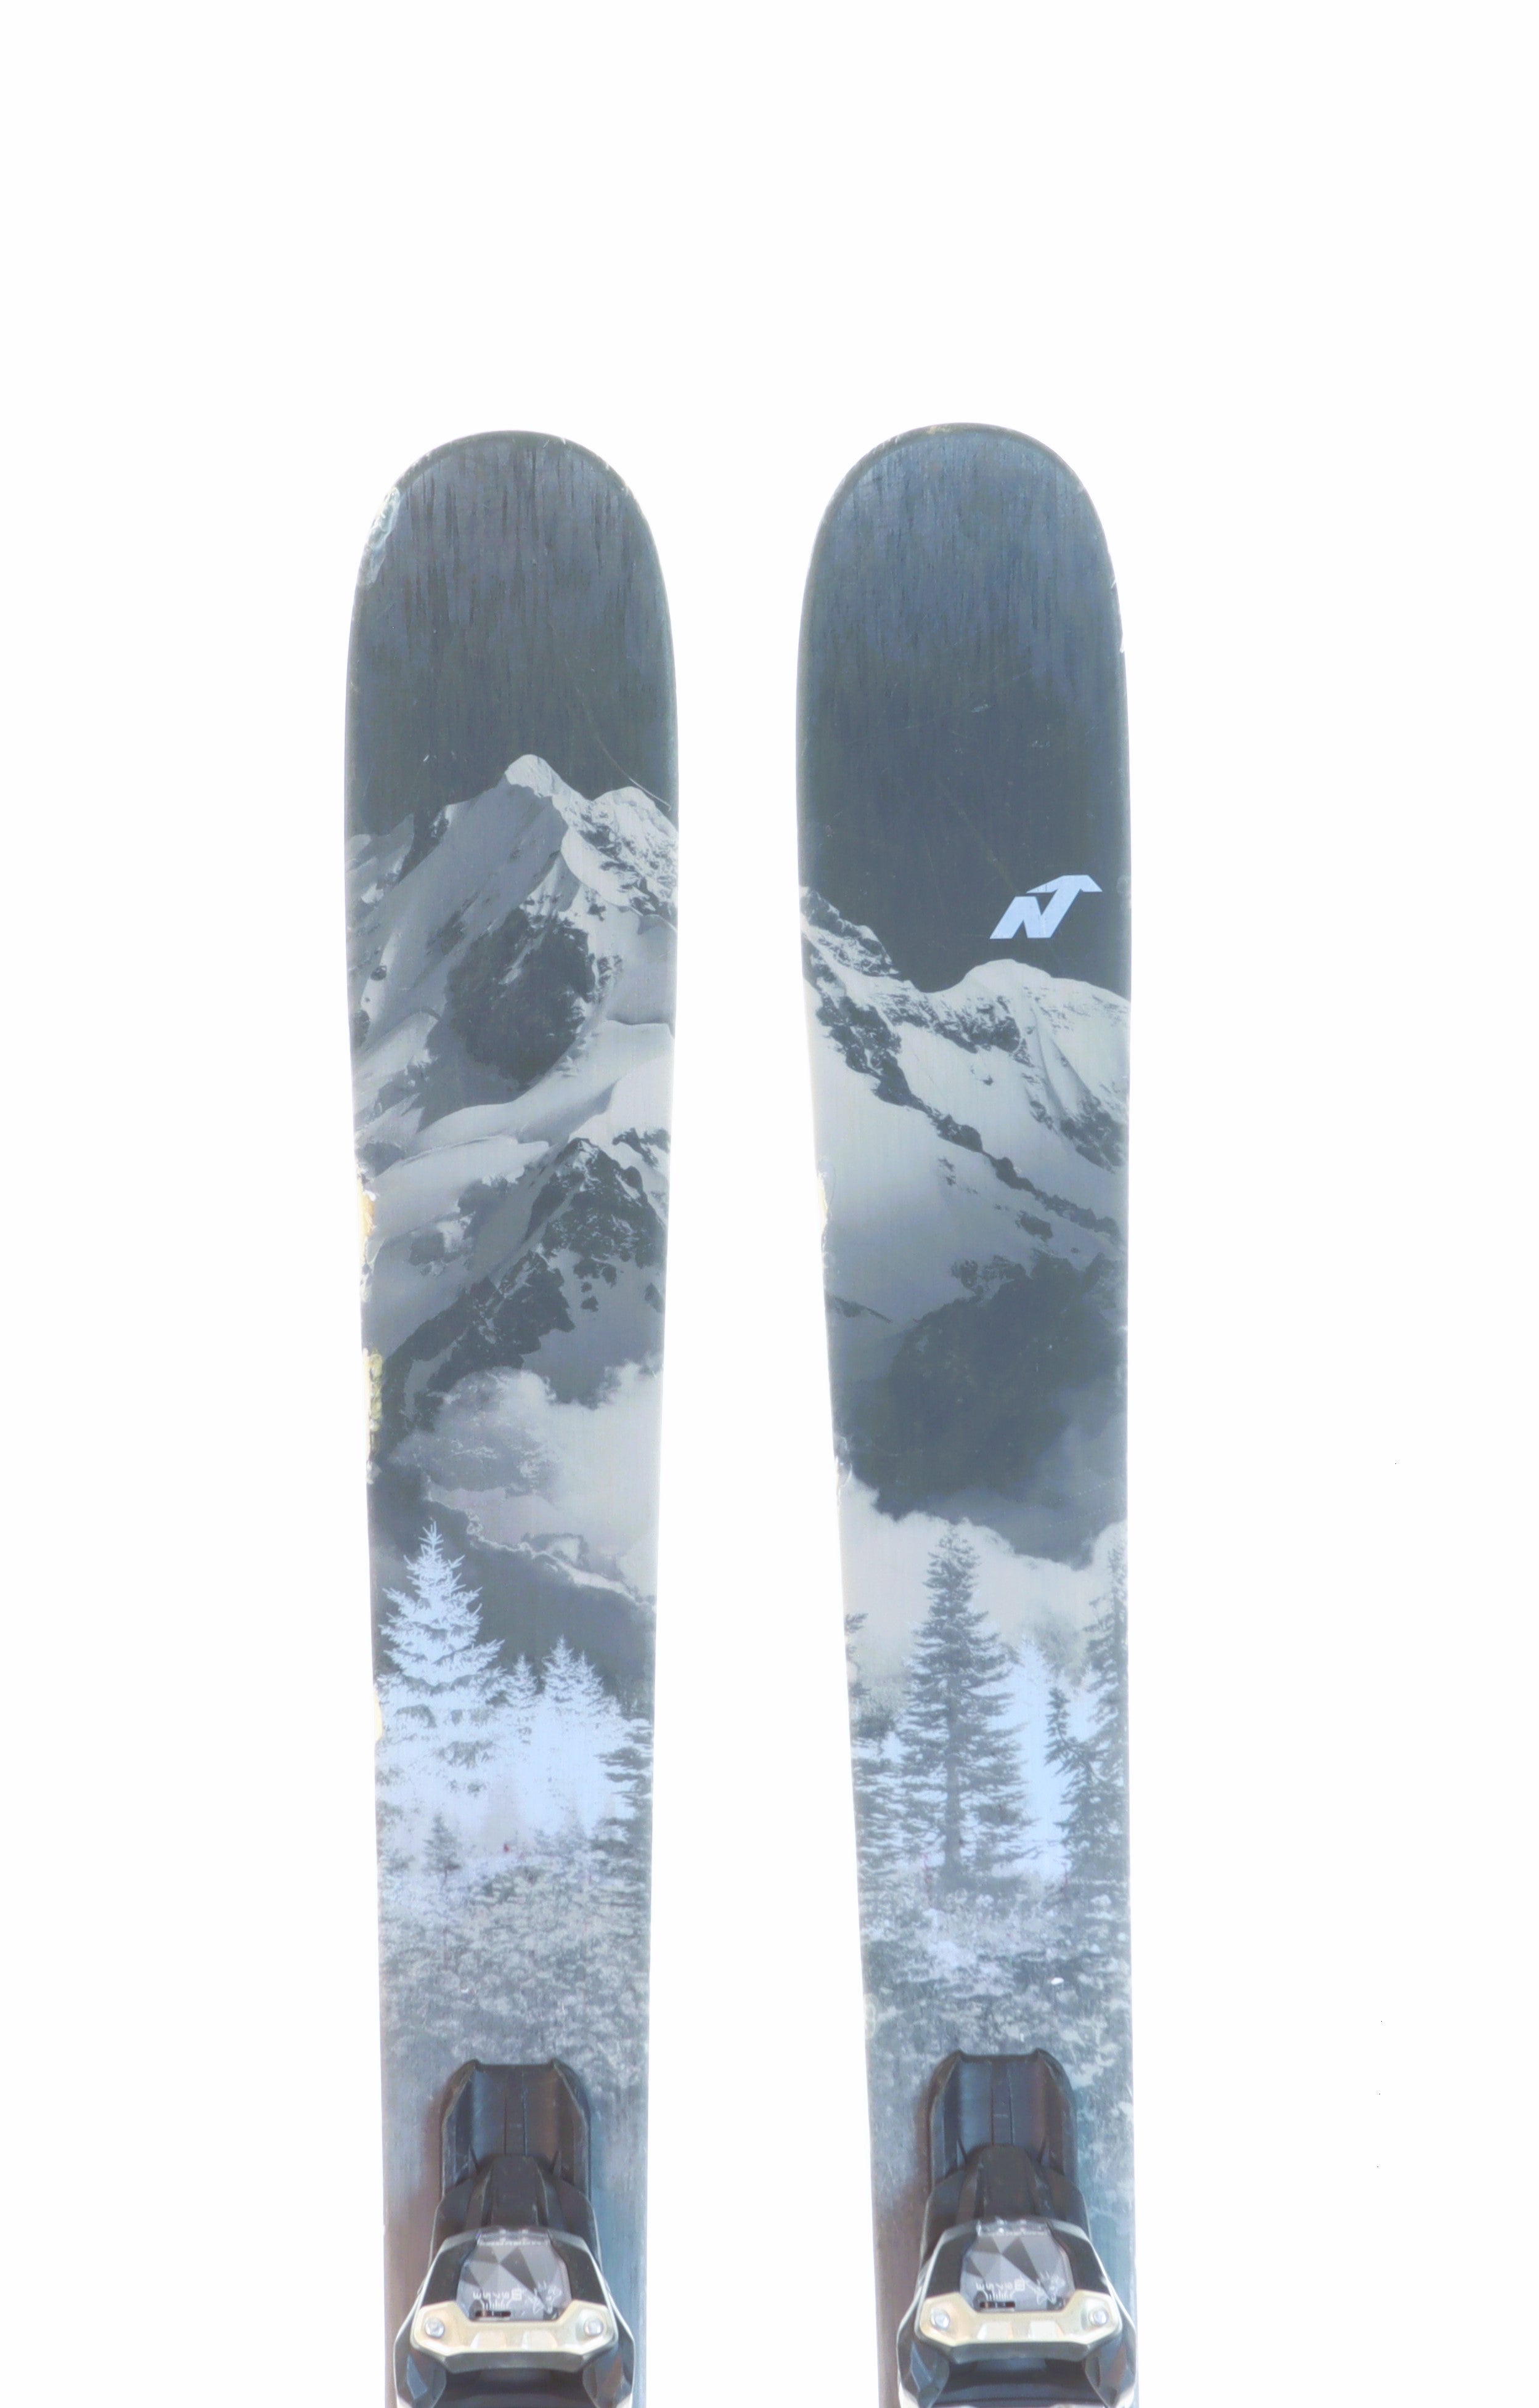 Used Nordica Santa Ana 93 161cm Skis with Marker Squire Bindings